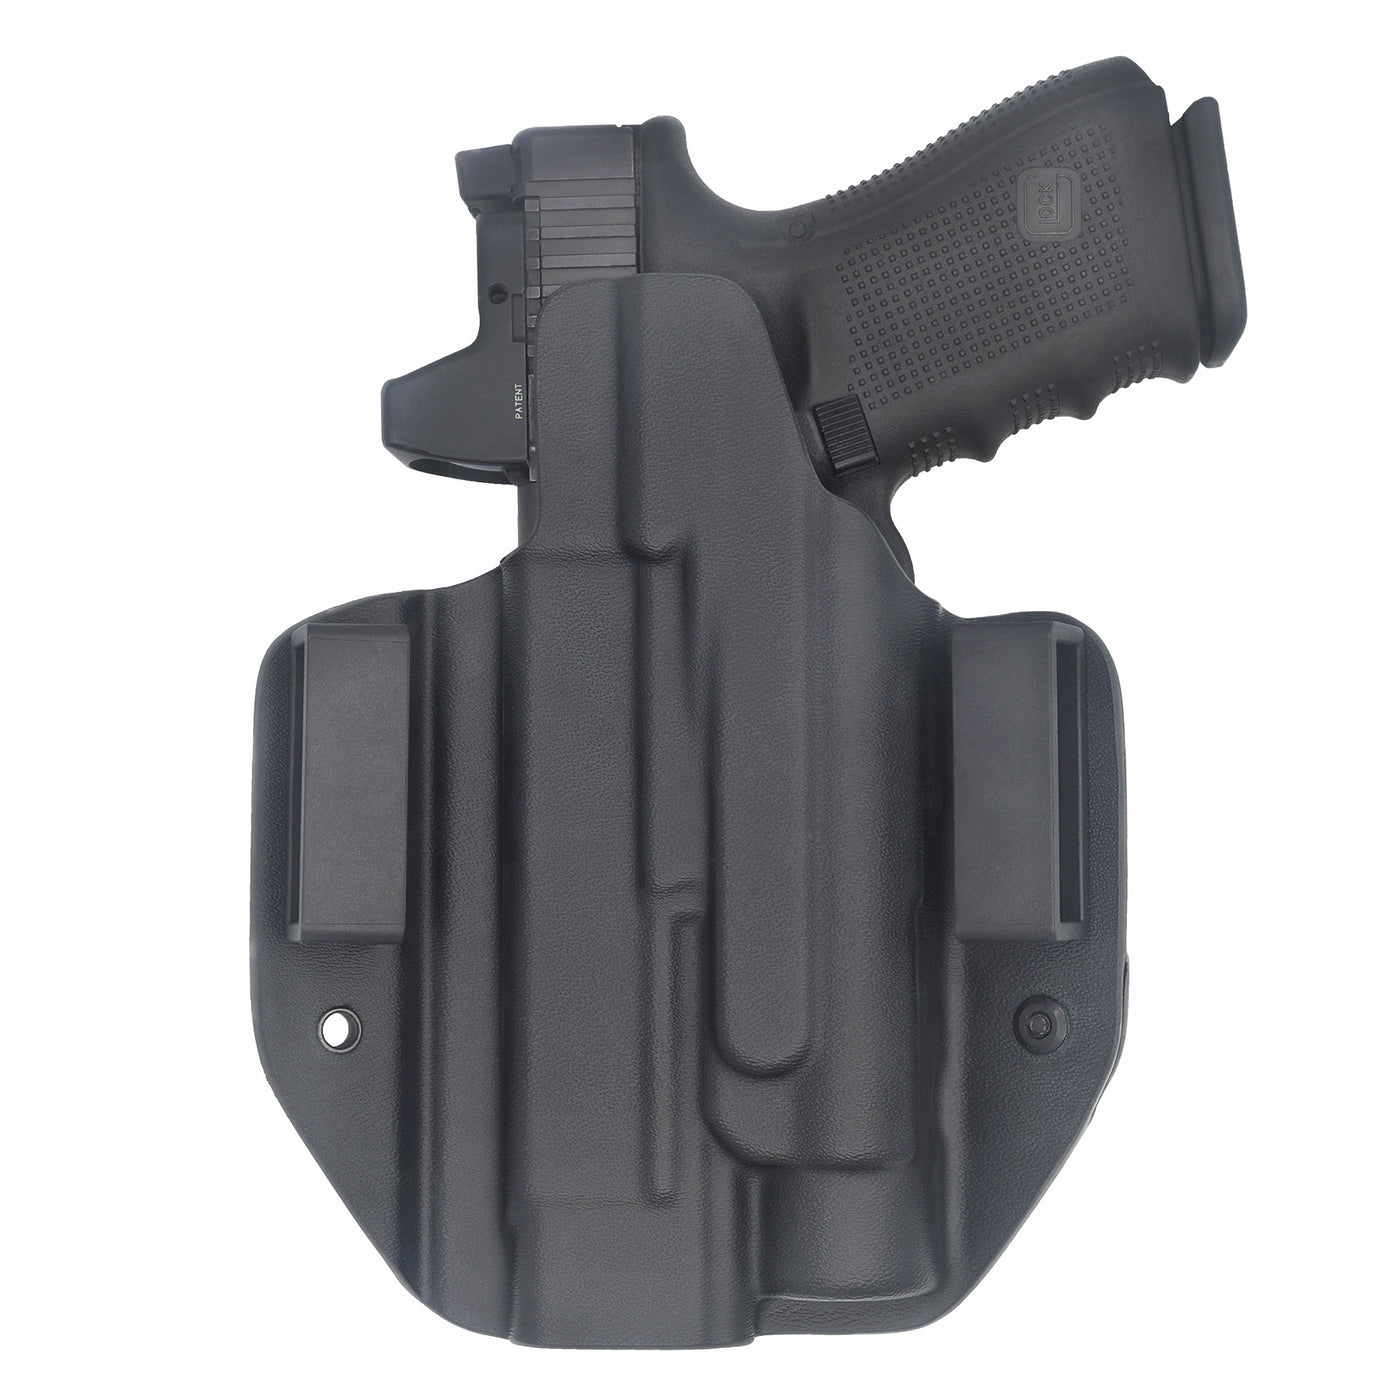 C&G Holsters quickship OWB Tactical Shadow Systems Streamlight TLR1 holstered back view